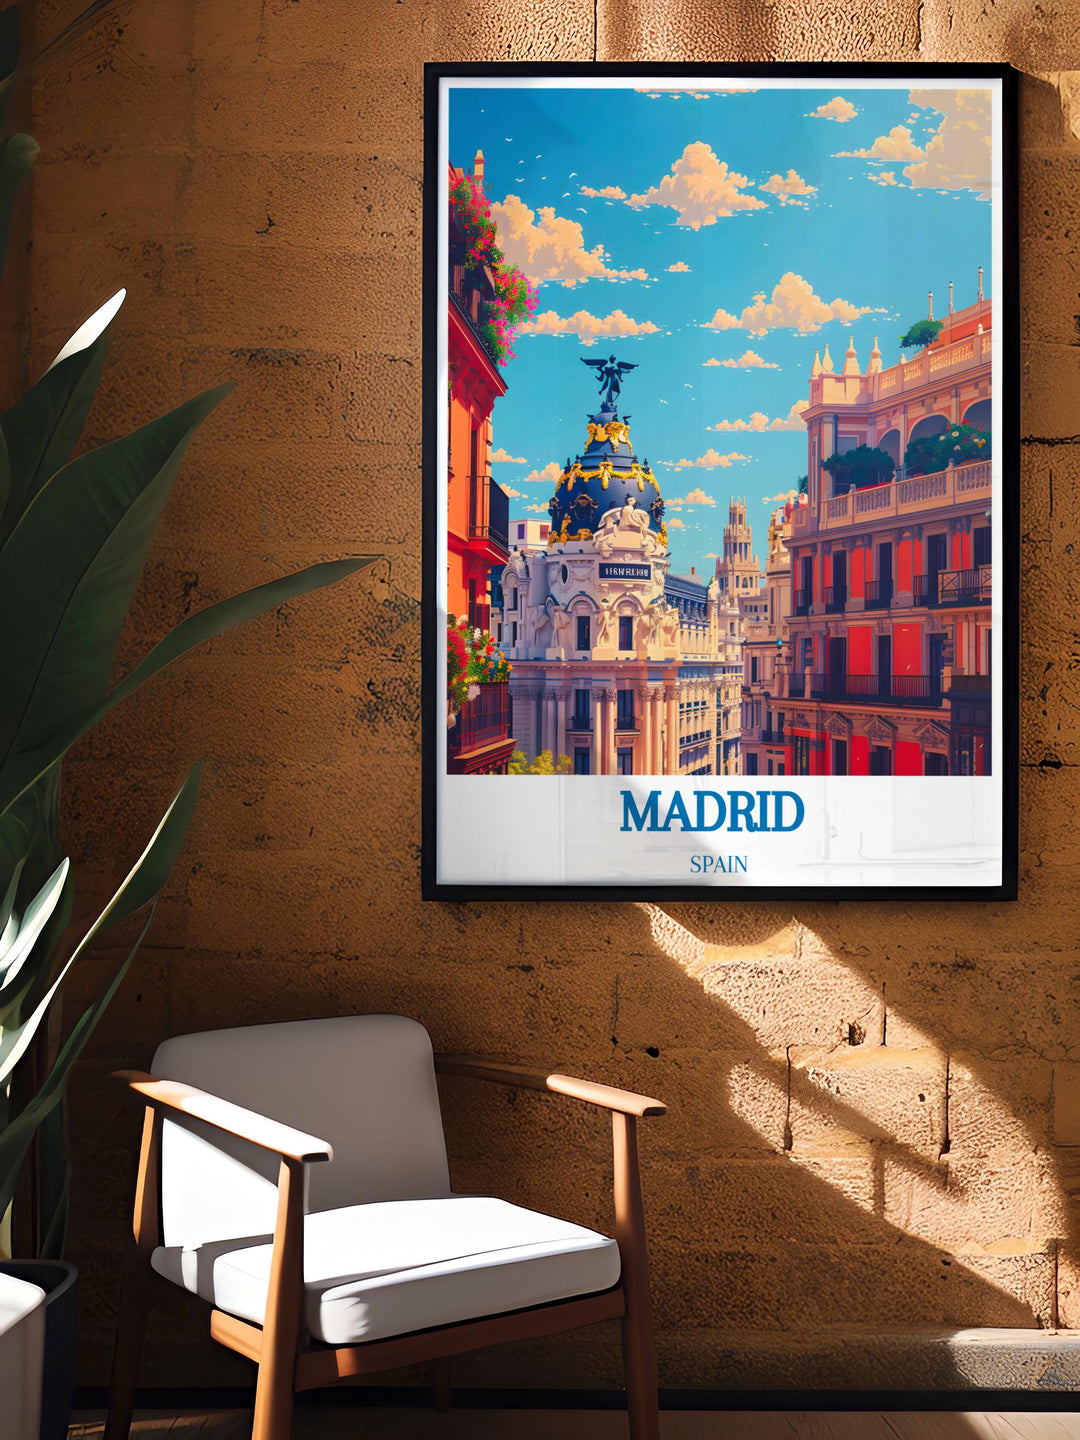 Customizable art print of a Madrid landmark, perfect for personalizing your gallery wall.